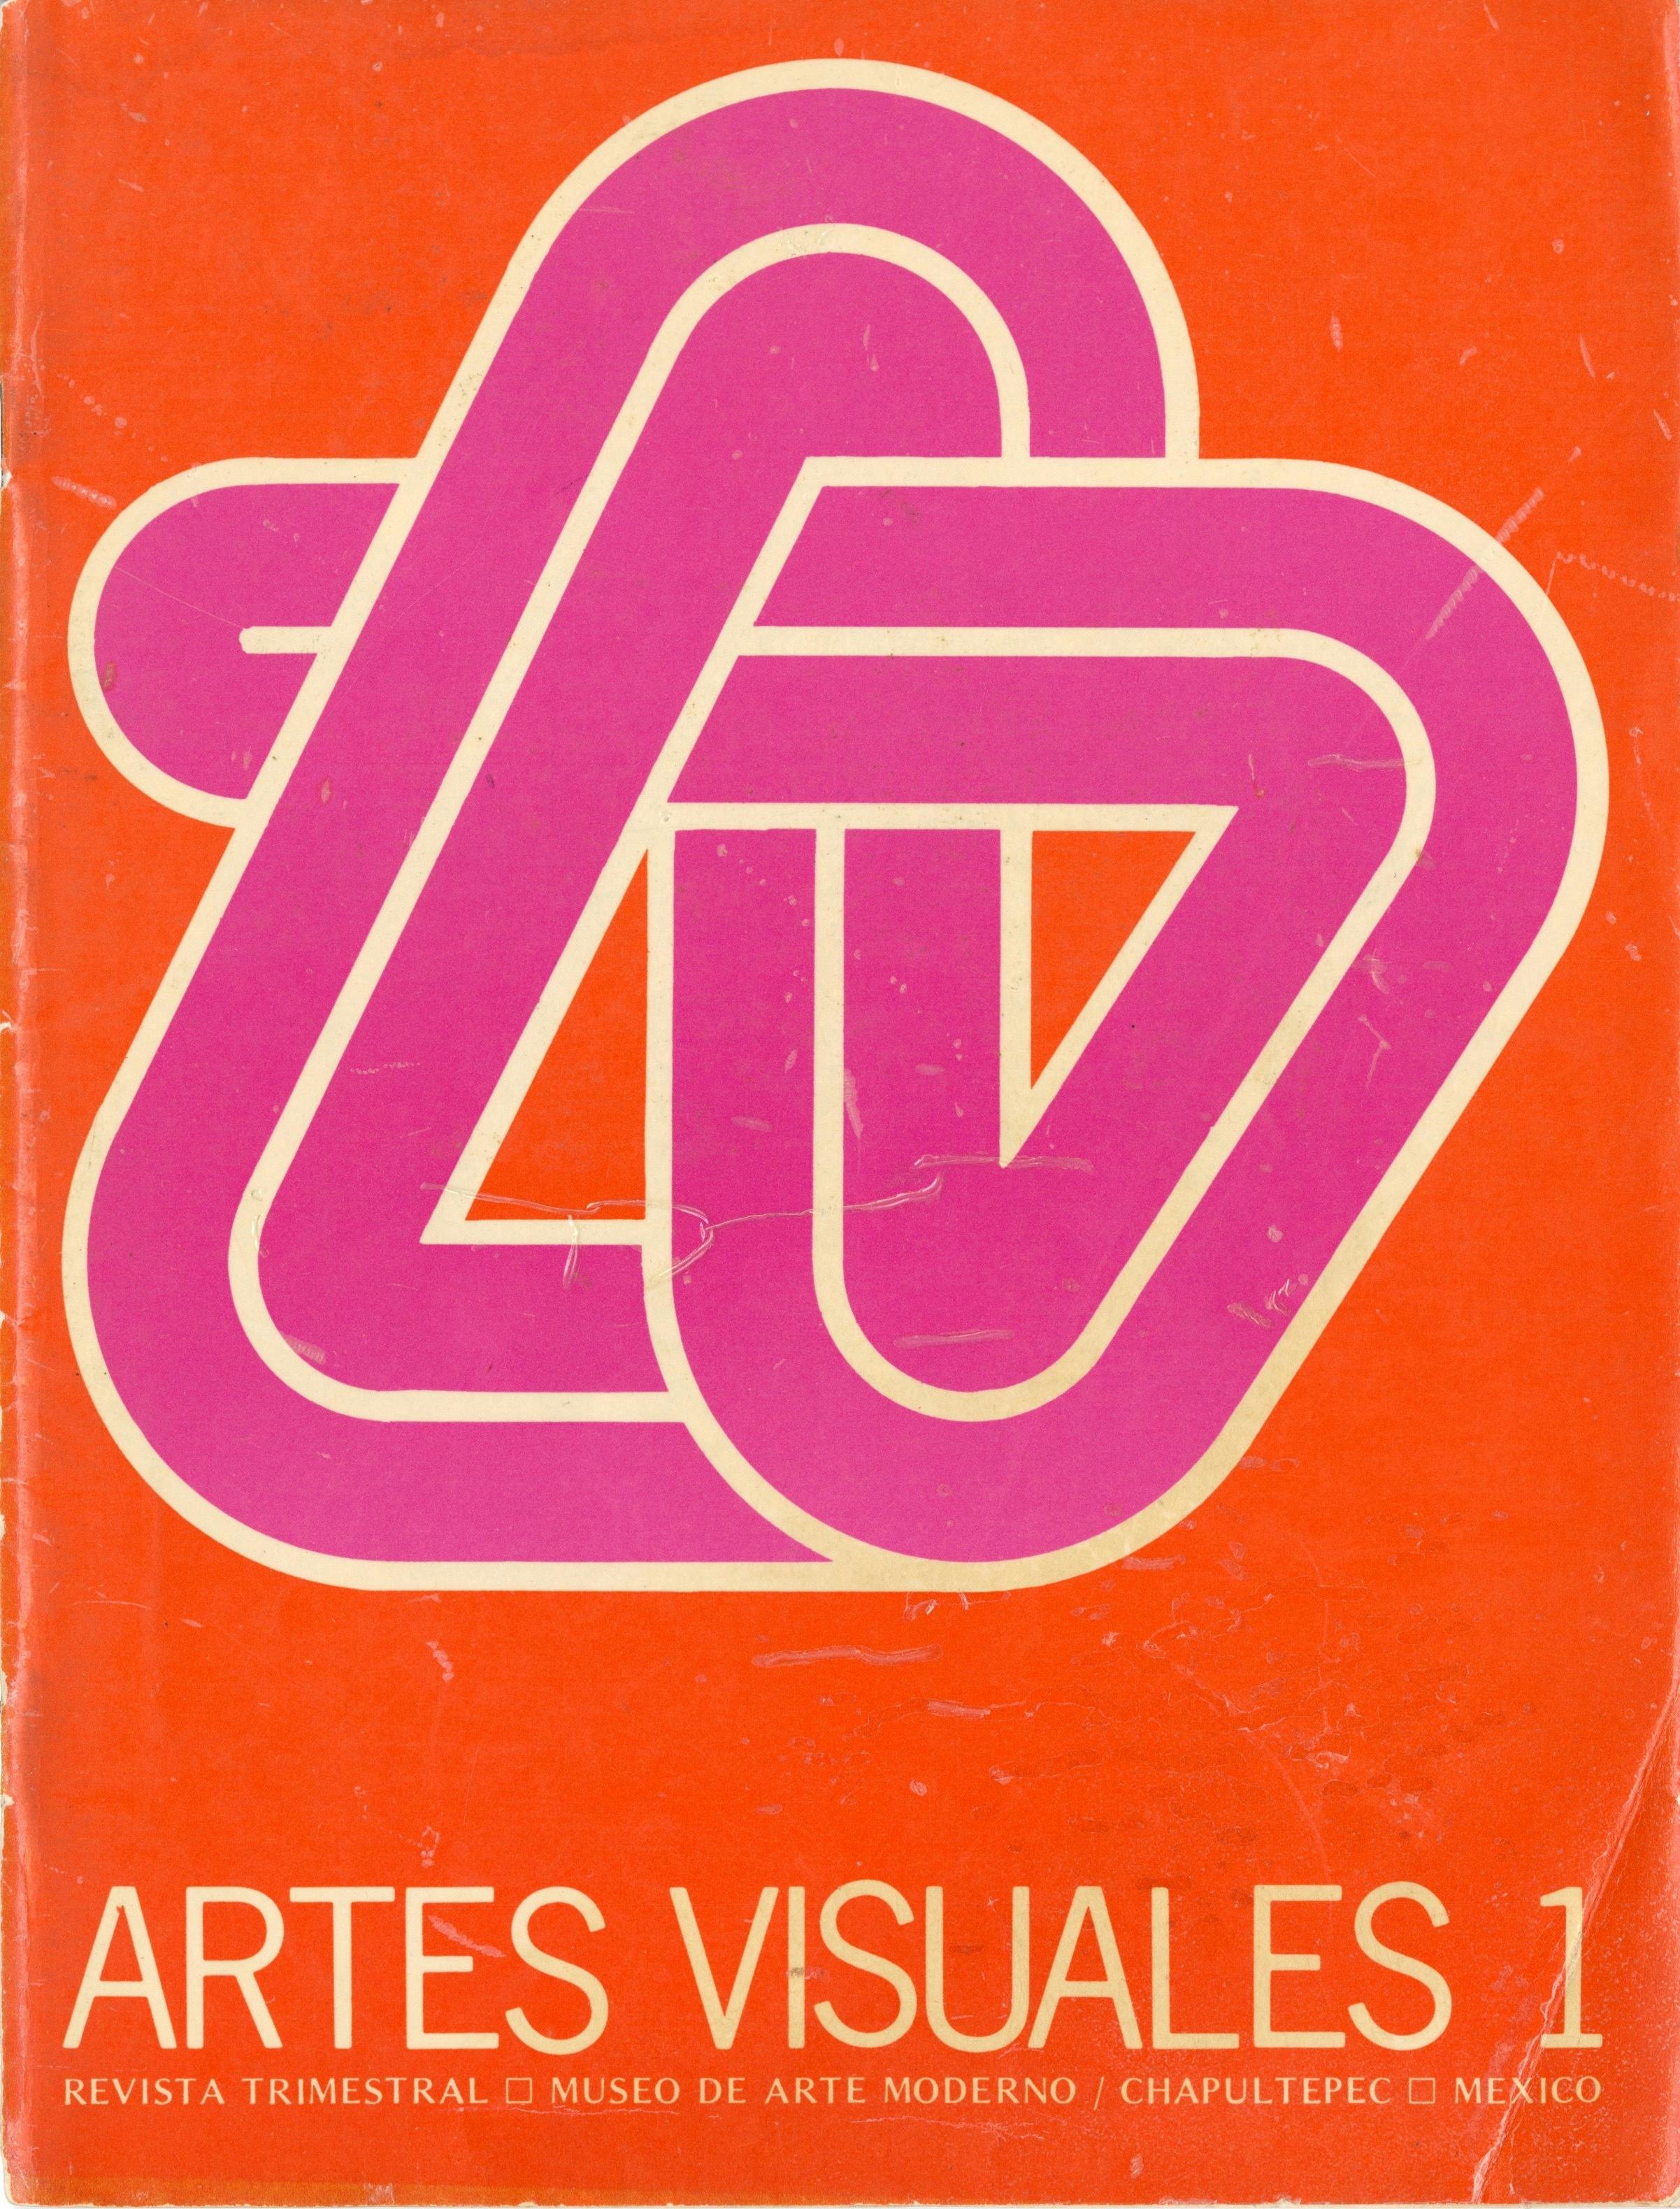 Magazine cover with geometric design in pink over orange background